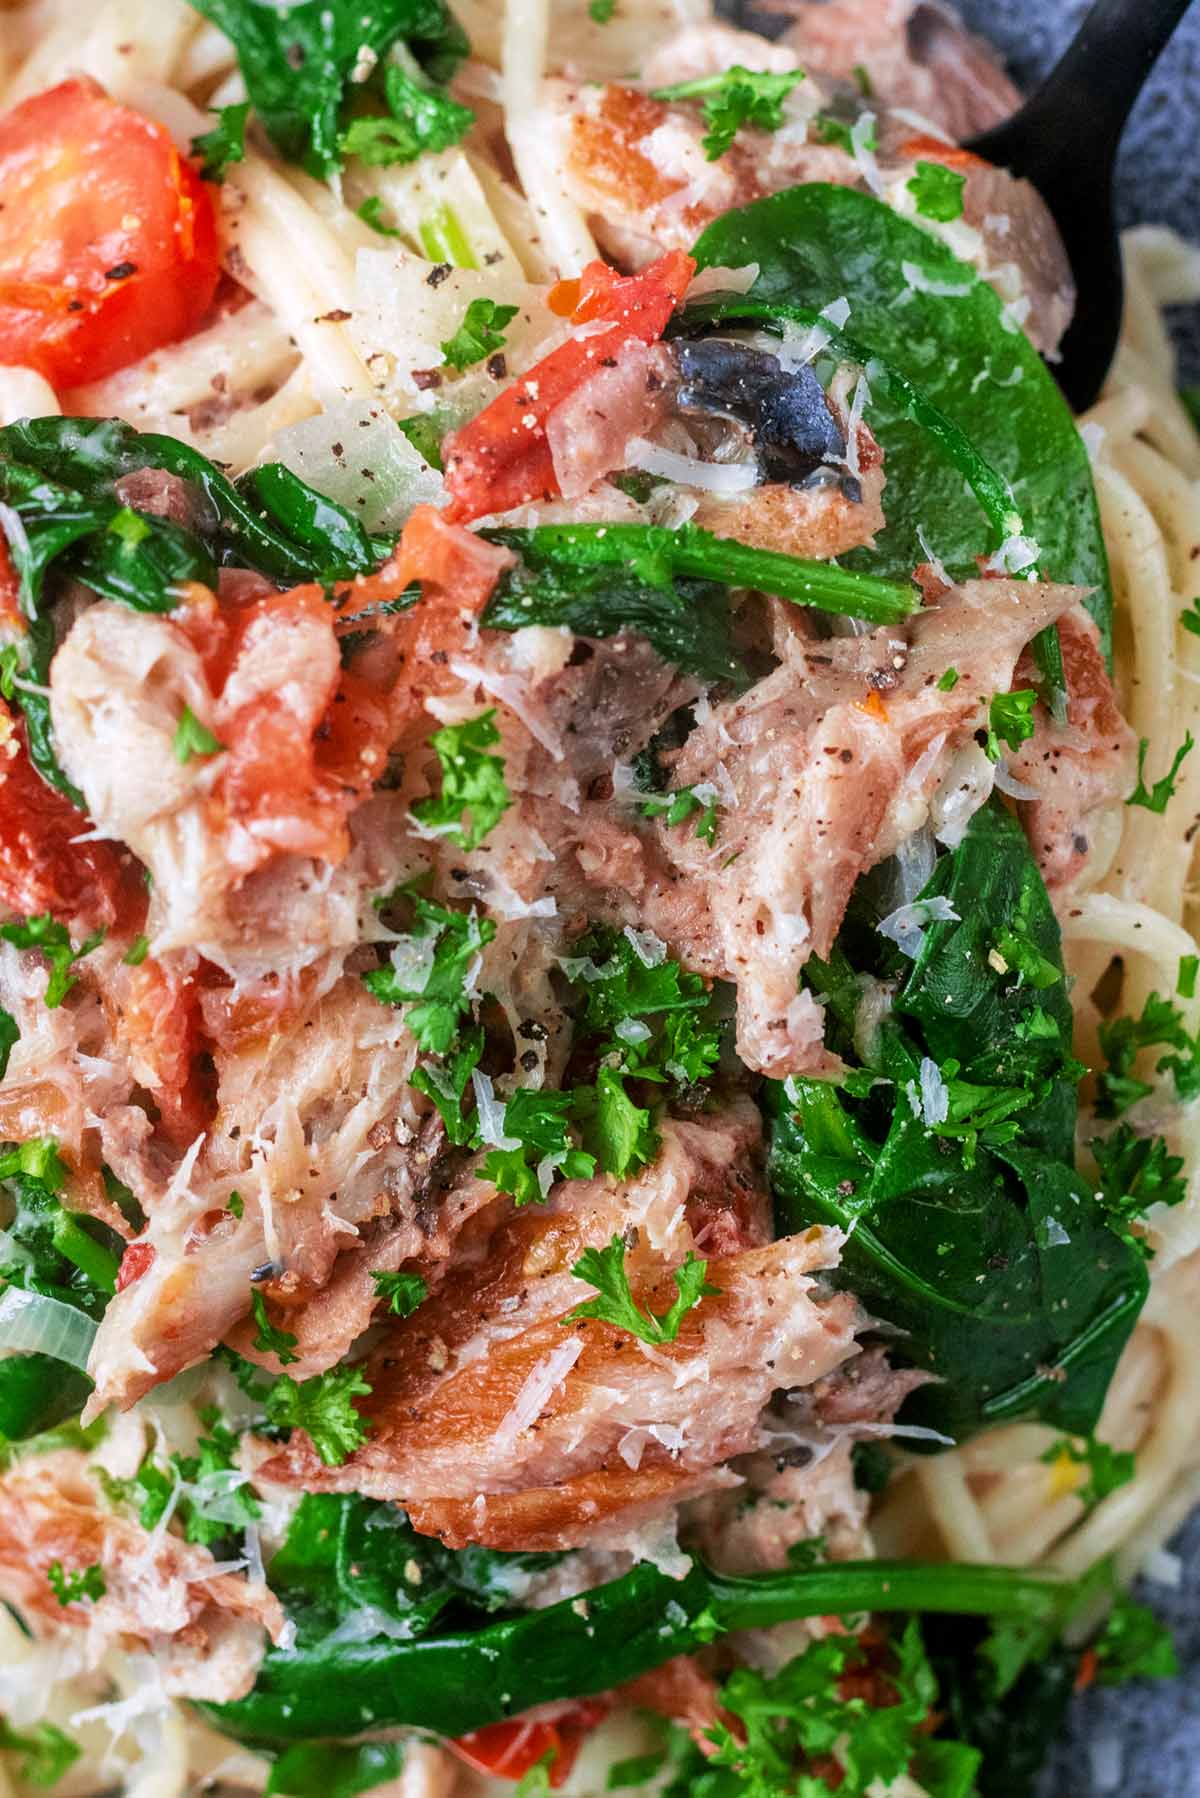 Flaked mackerel mixed into spaghetti, spinach and tomatoes.